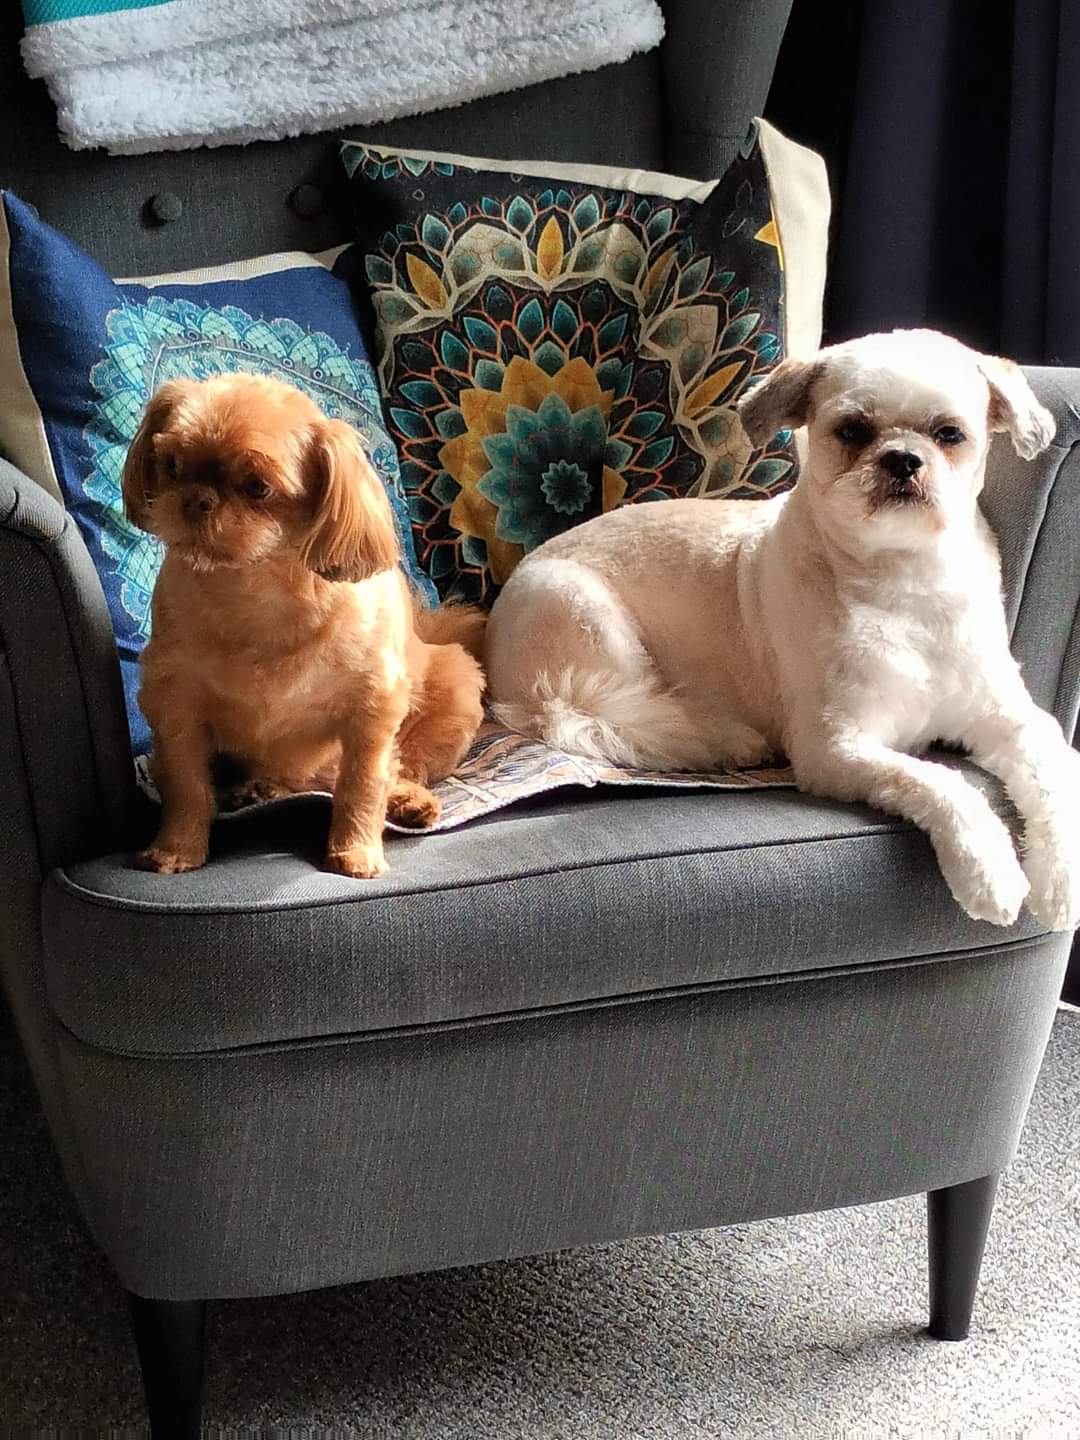 April 1st- Ozzy and Maddie